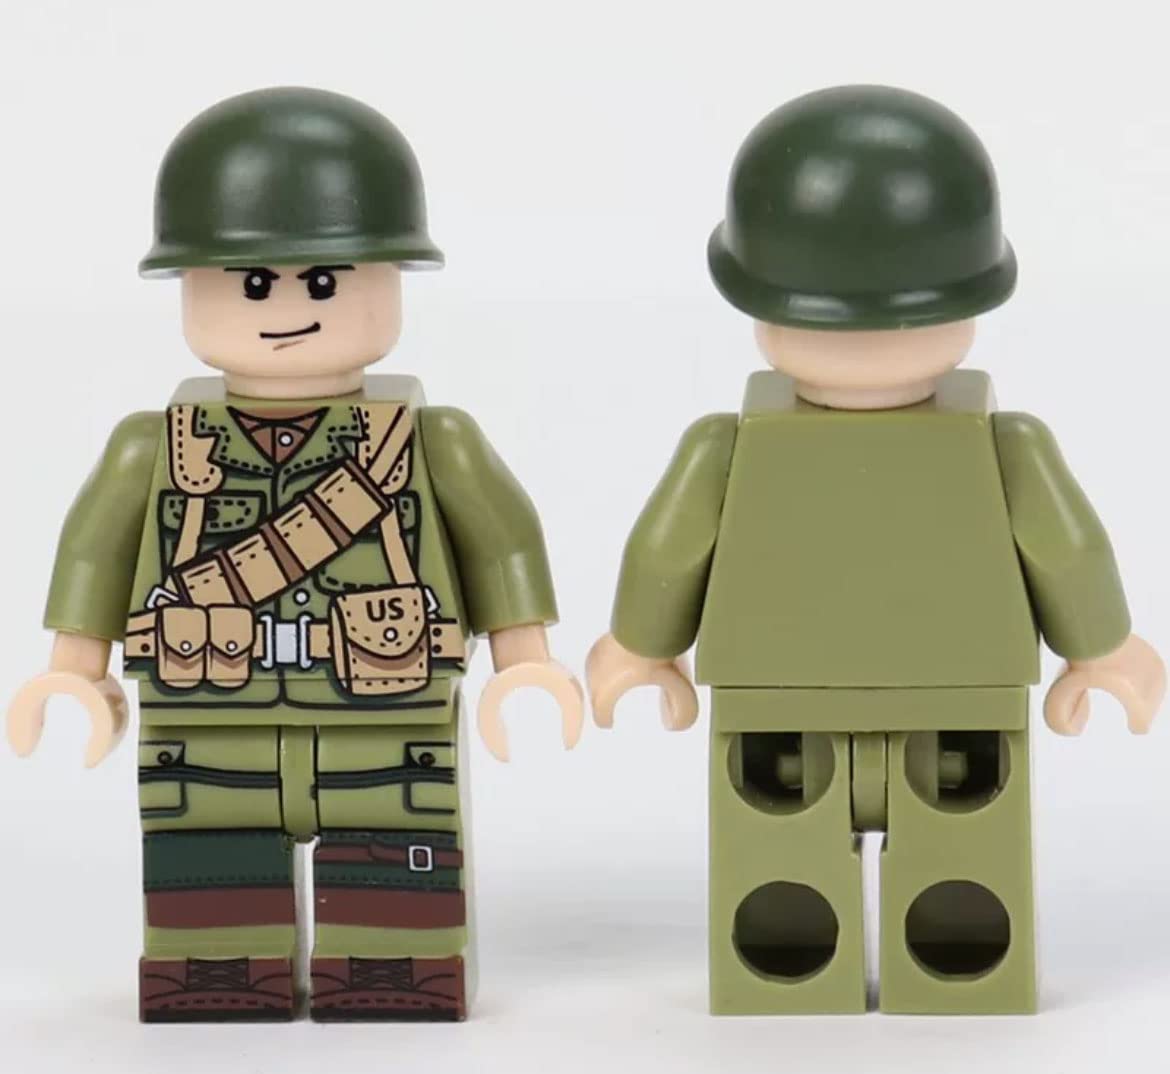 50 pcs American vs German Army Squad WW2 World War II Custom Mini Soldiers Minifigures Set Weapons Blitzkrieg Action Figures Building Blocks Weapons, Sand Bags，Artillery Toy Rifles，Army Battle Playset